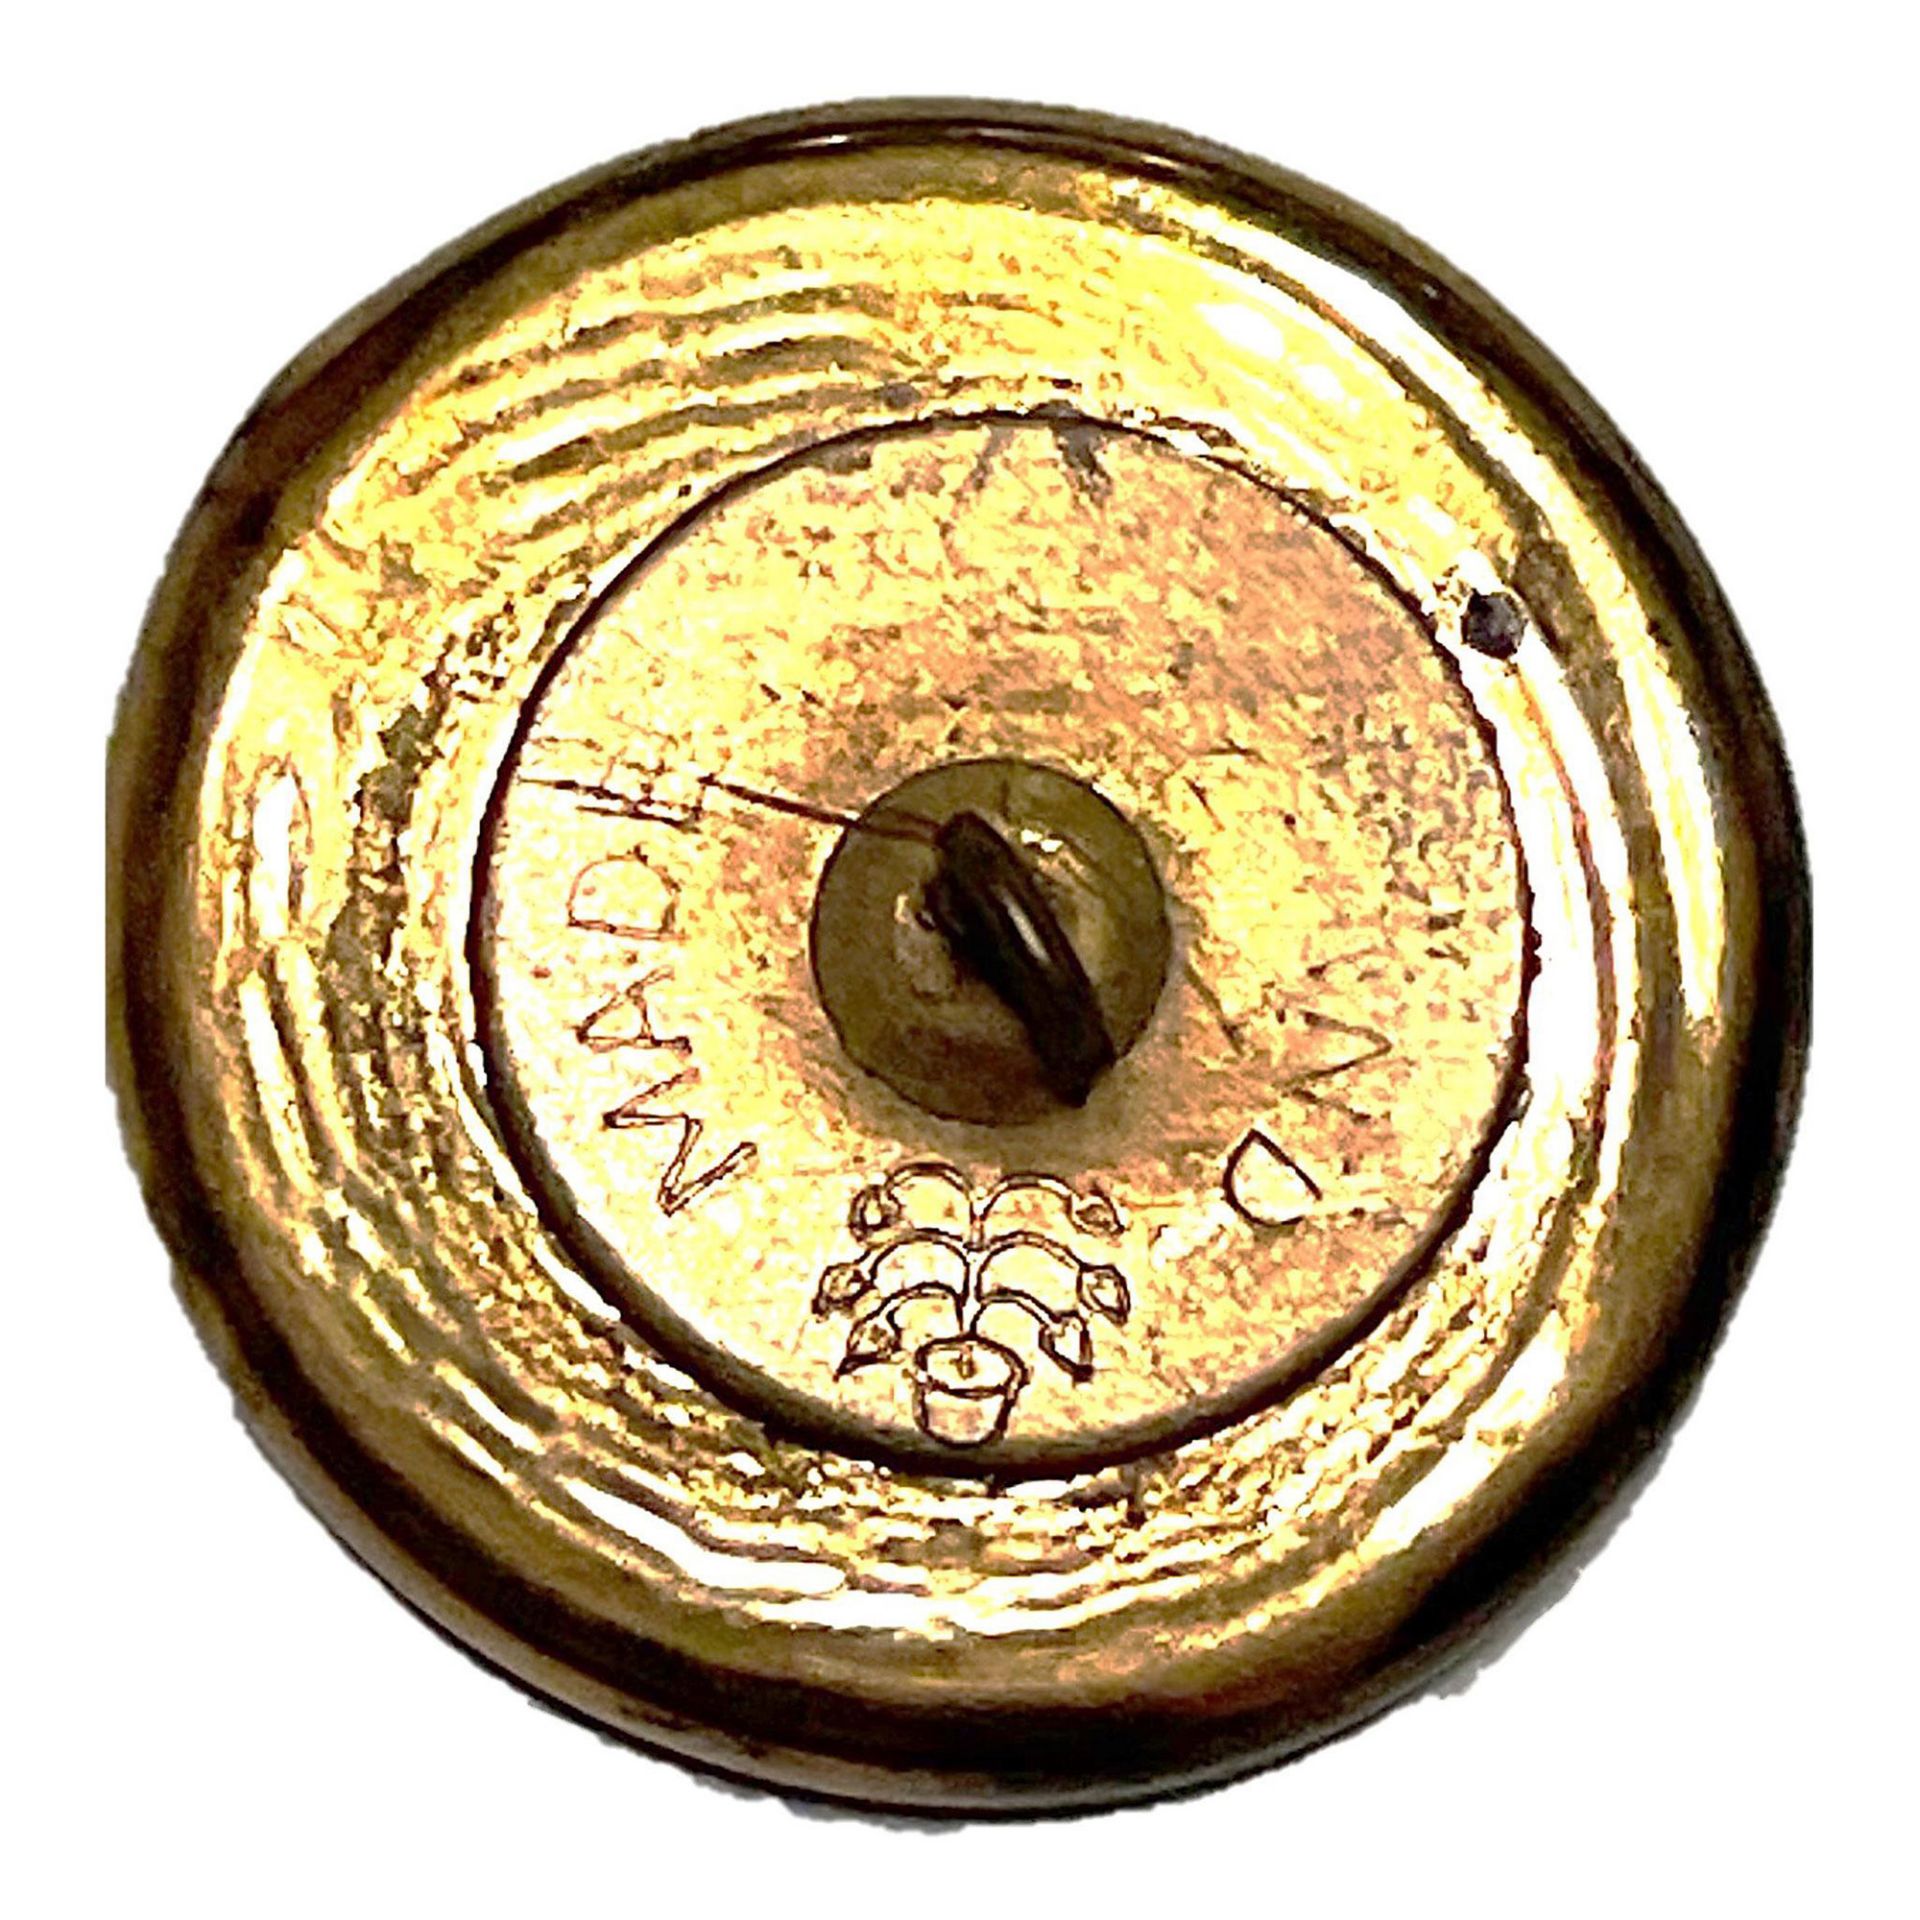 A division 3 backmarked Glass button from England - Bild 3 aus 3